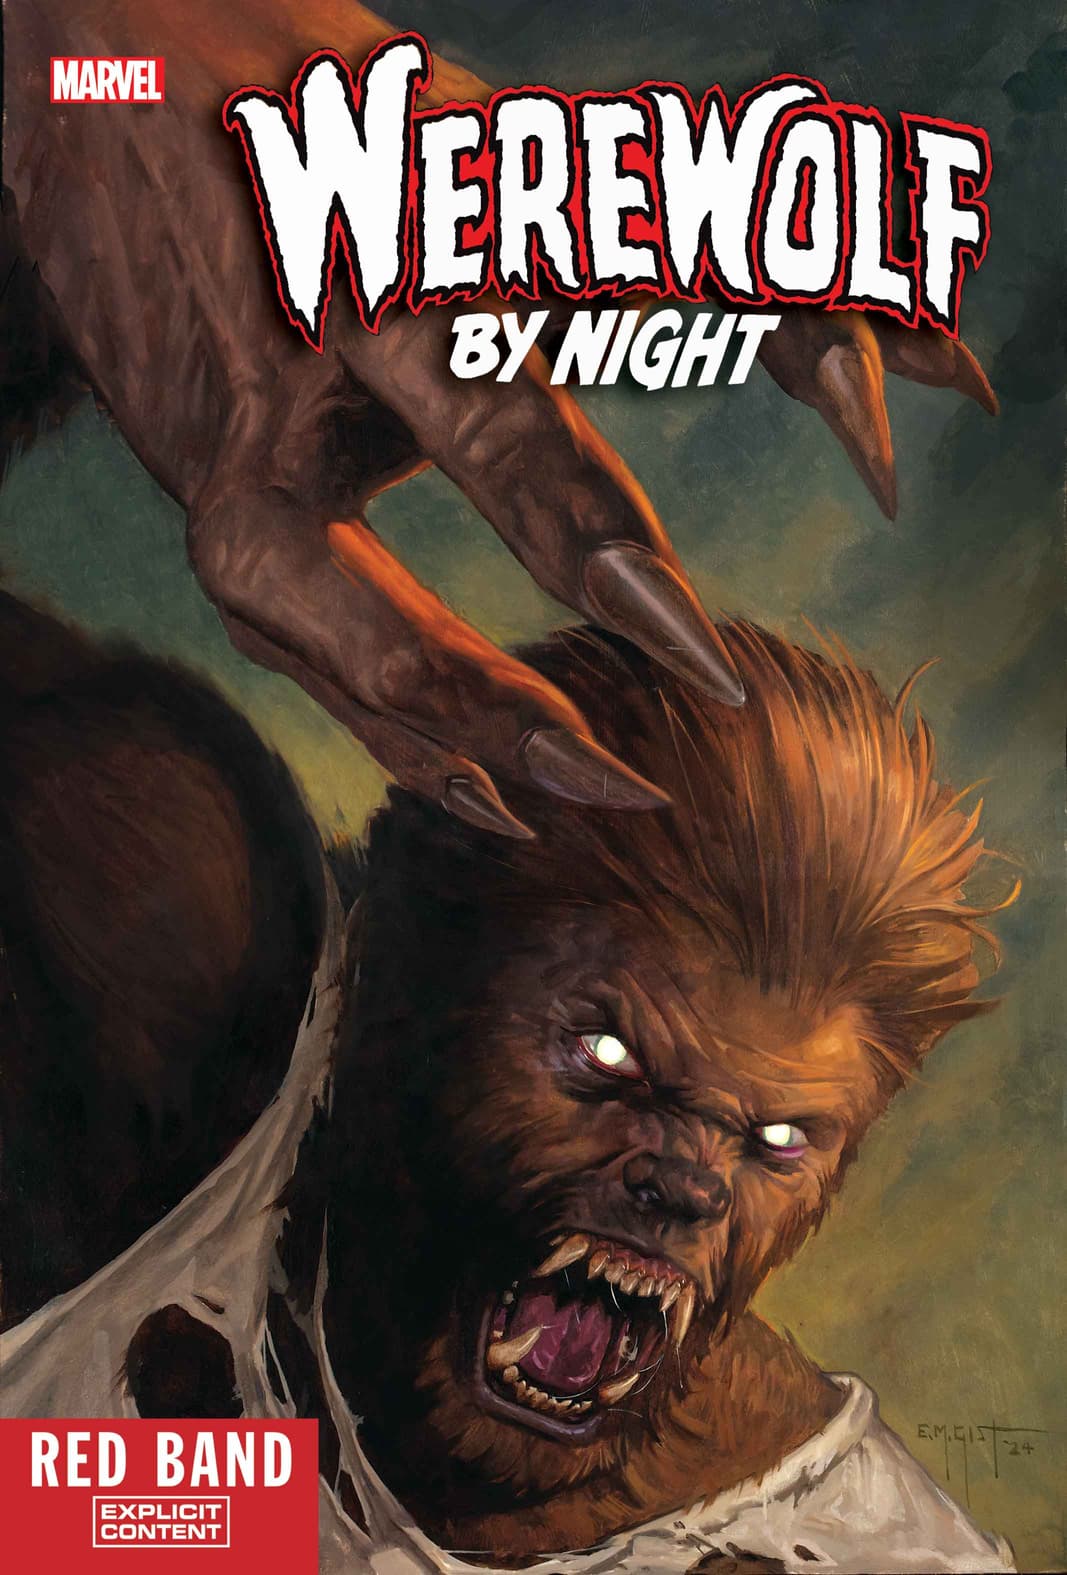 WEREWOLF BY NIGHT #1 cover by E.M. Gist